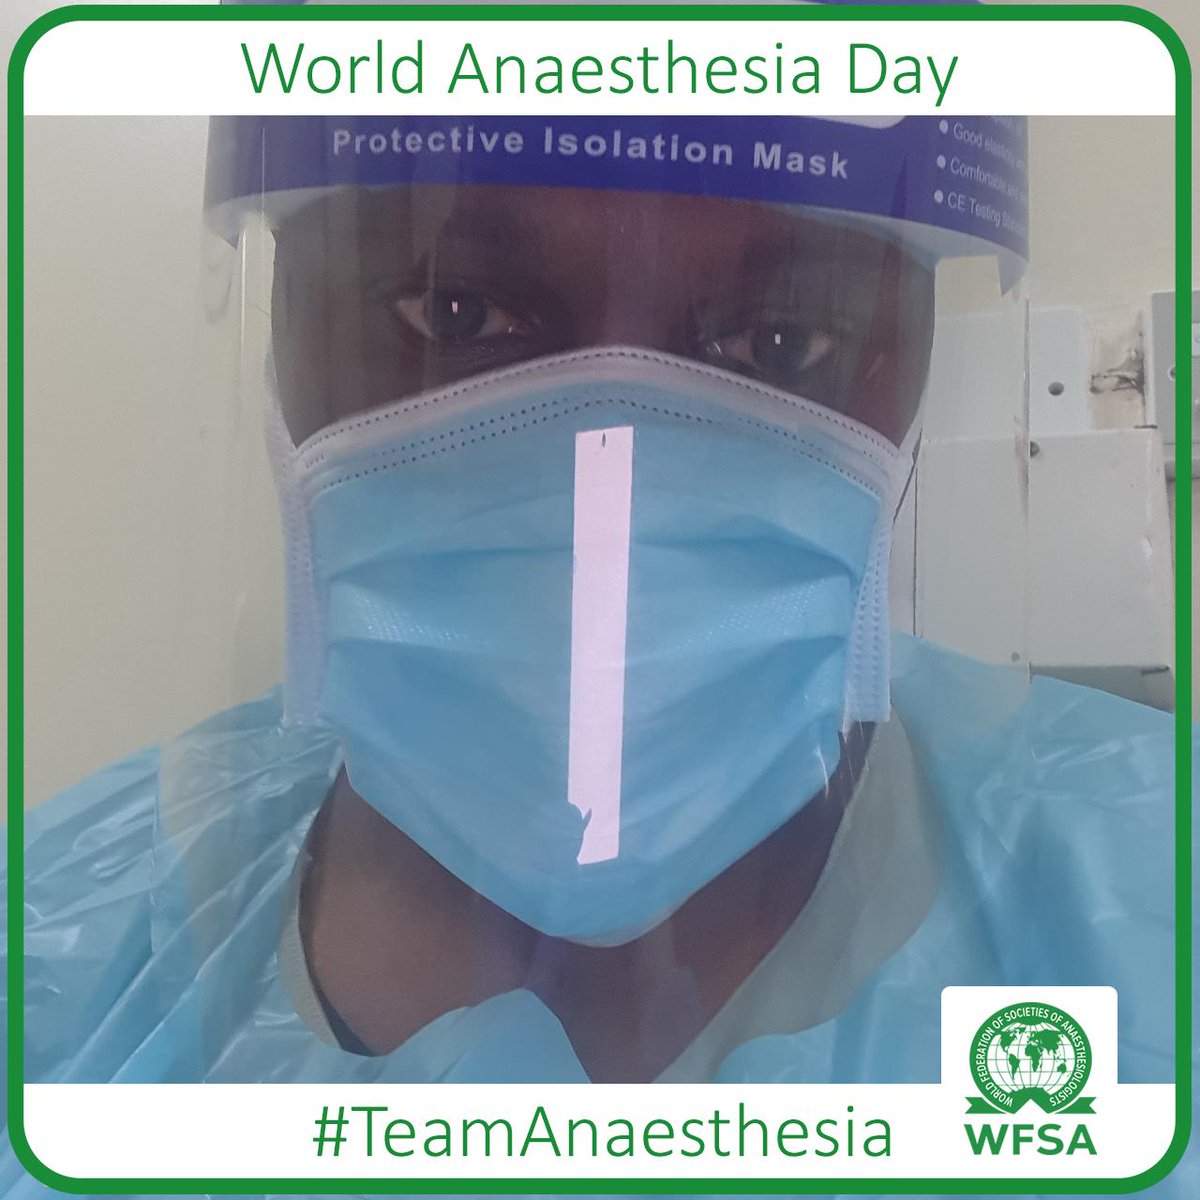 Happy World Anaesthesia Day!
#TeamAnaesthesia 
#WAD2021